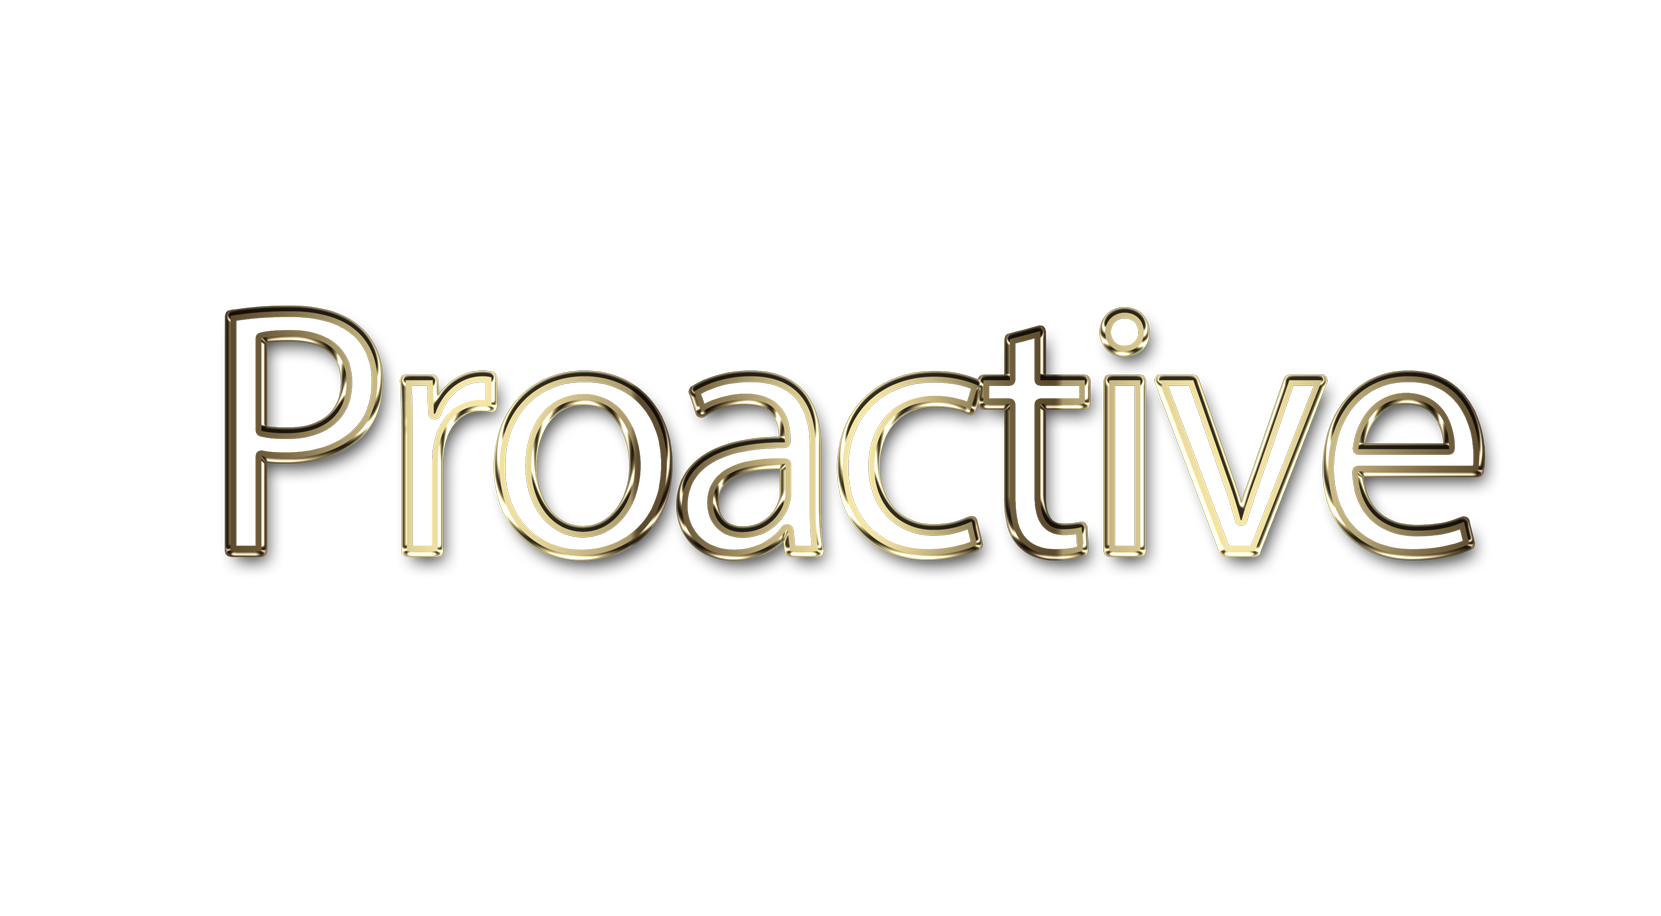 Proactive png, word Proactive png, Proactive word png, Proactive text png, Proactive letters png, Proactive word art typography PNG images, transparent png